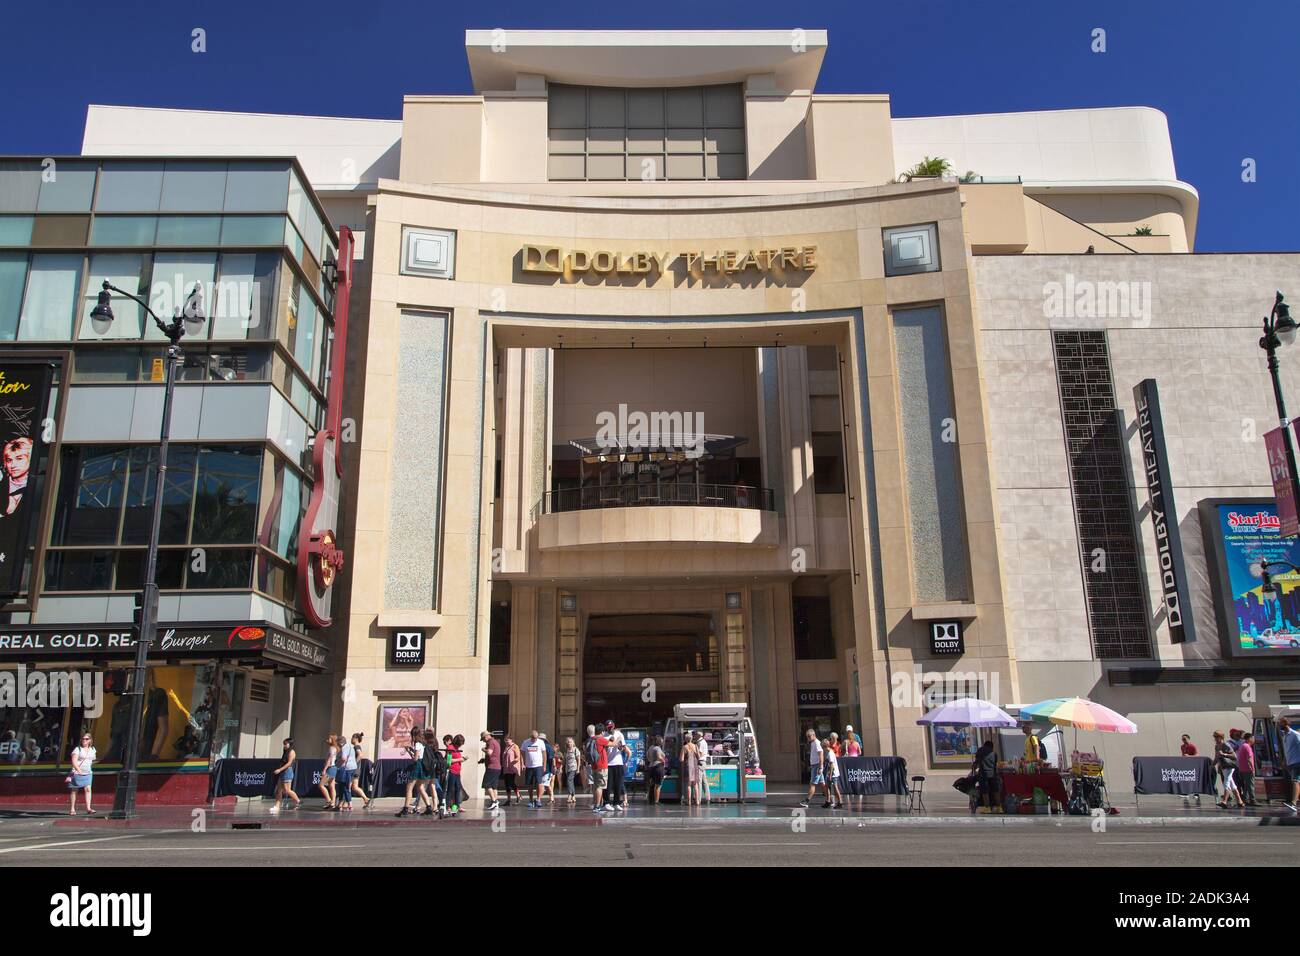 Dolby Theatre in Hollywood, Los Angeles, USA. Stockfoto